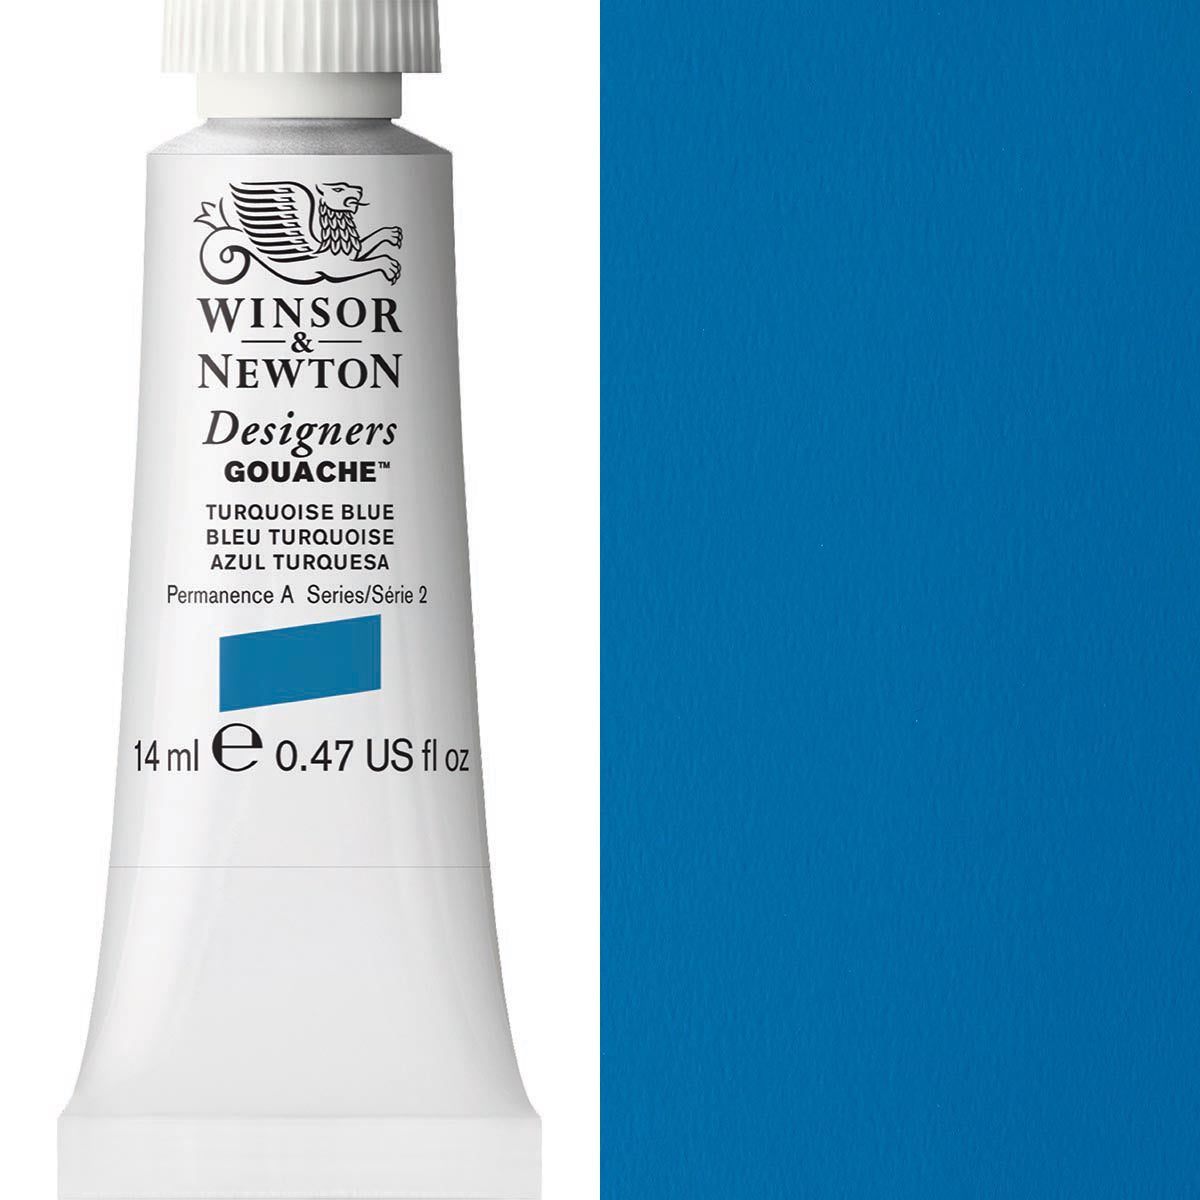 Winsor and Newton - Designers Gouache - 14ml - Turquoise Blue